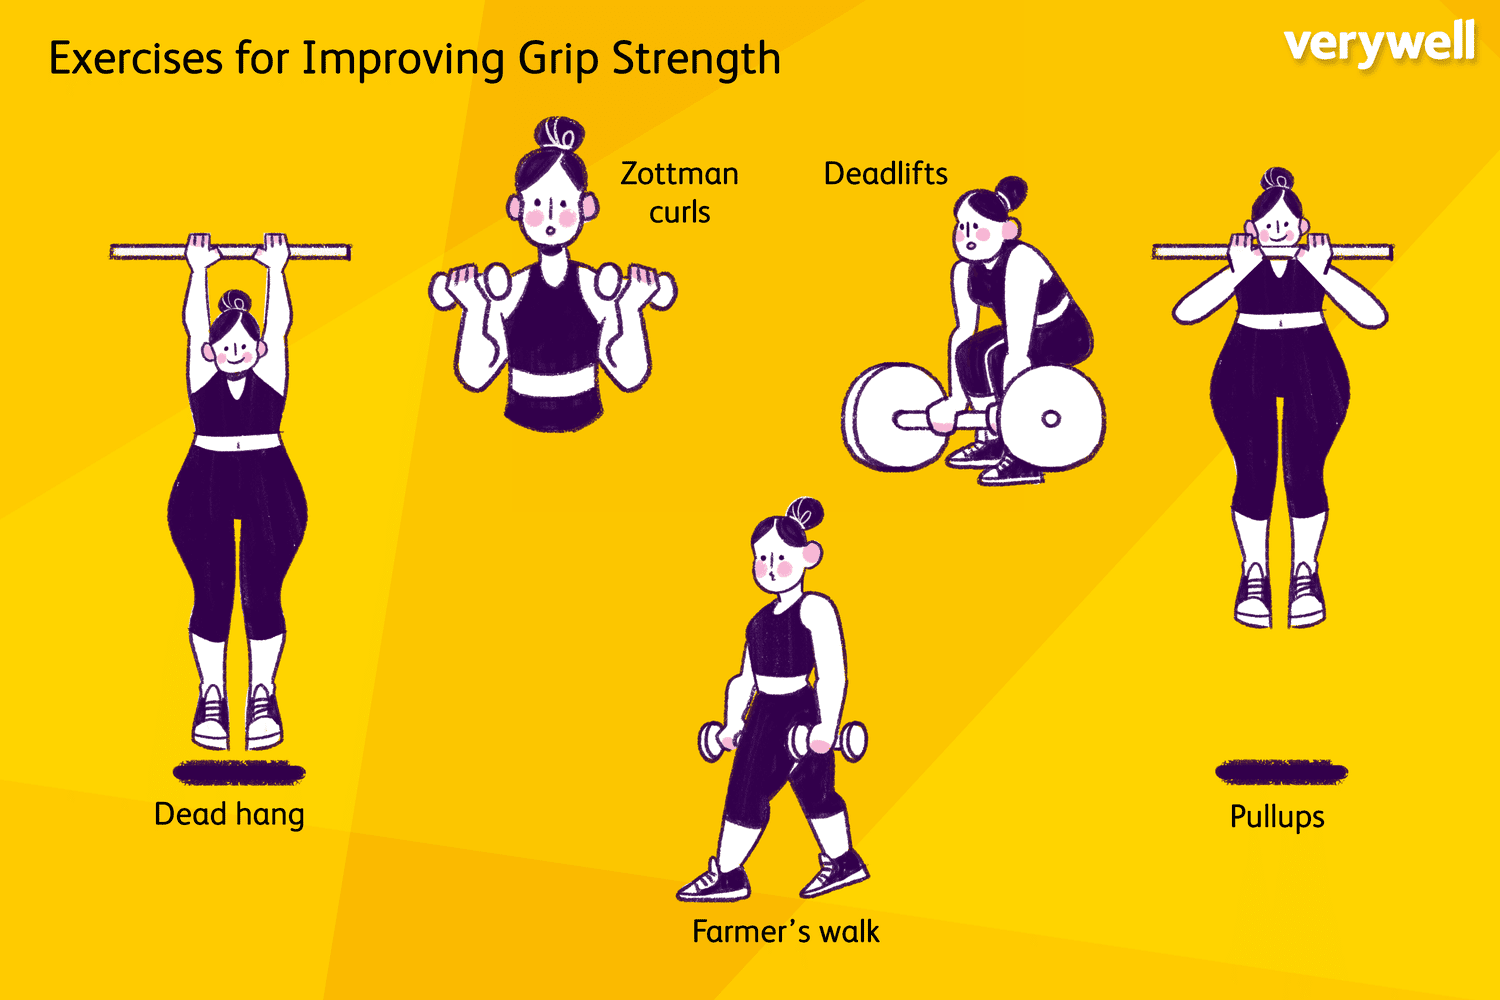 Exercises for improving grip strength